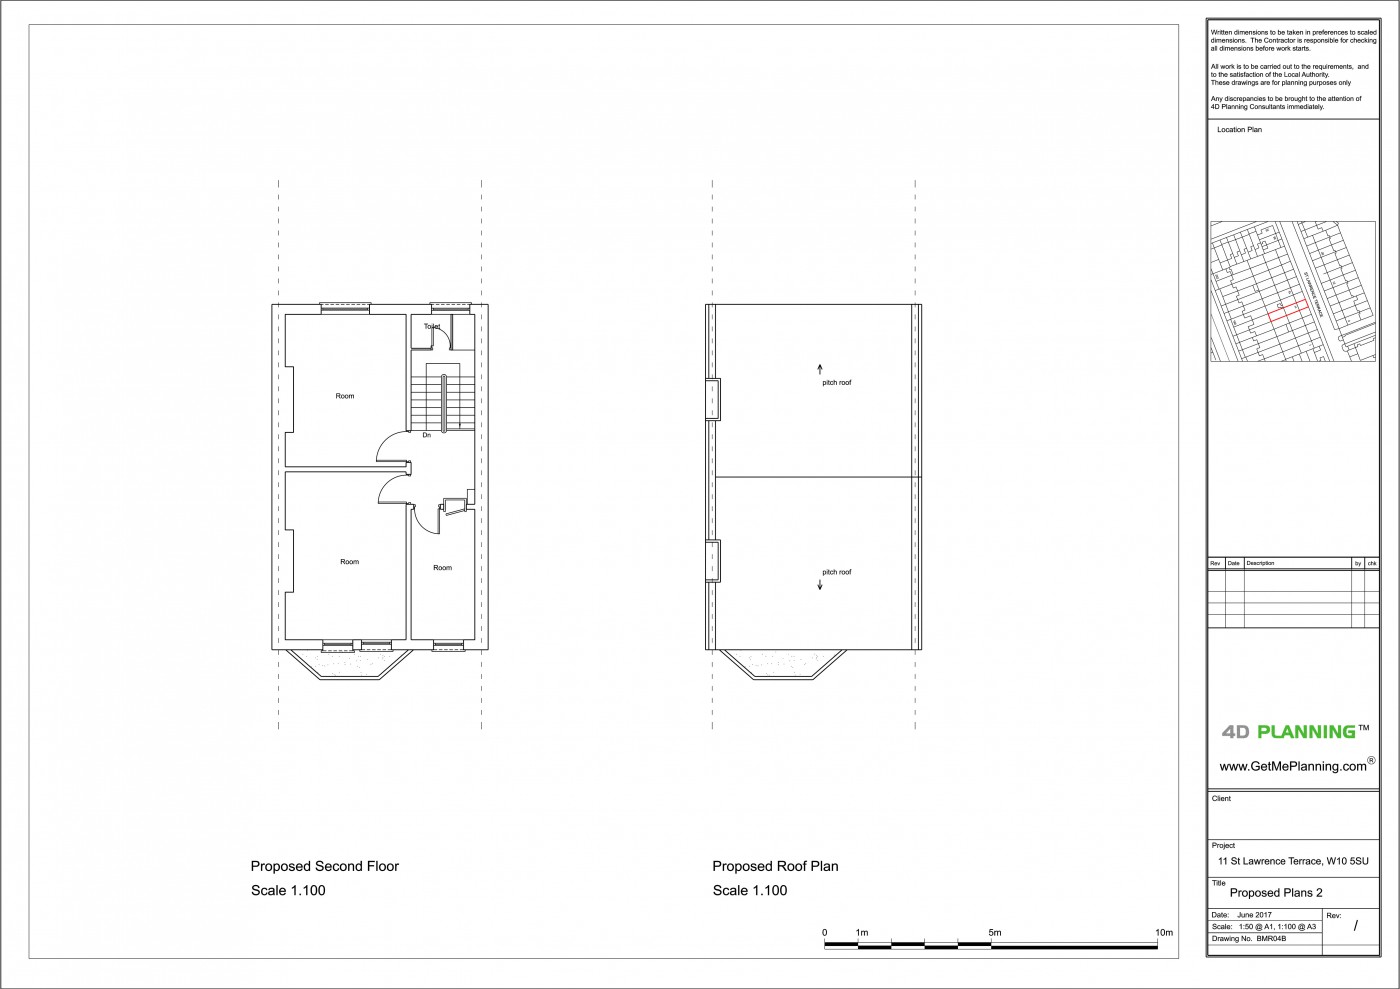 Architectural Drawings for a mid terraced house in RBKC